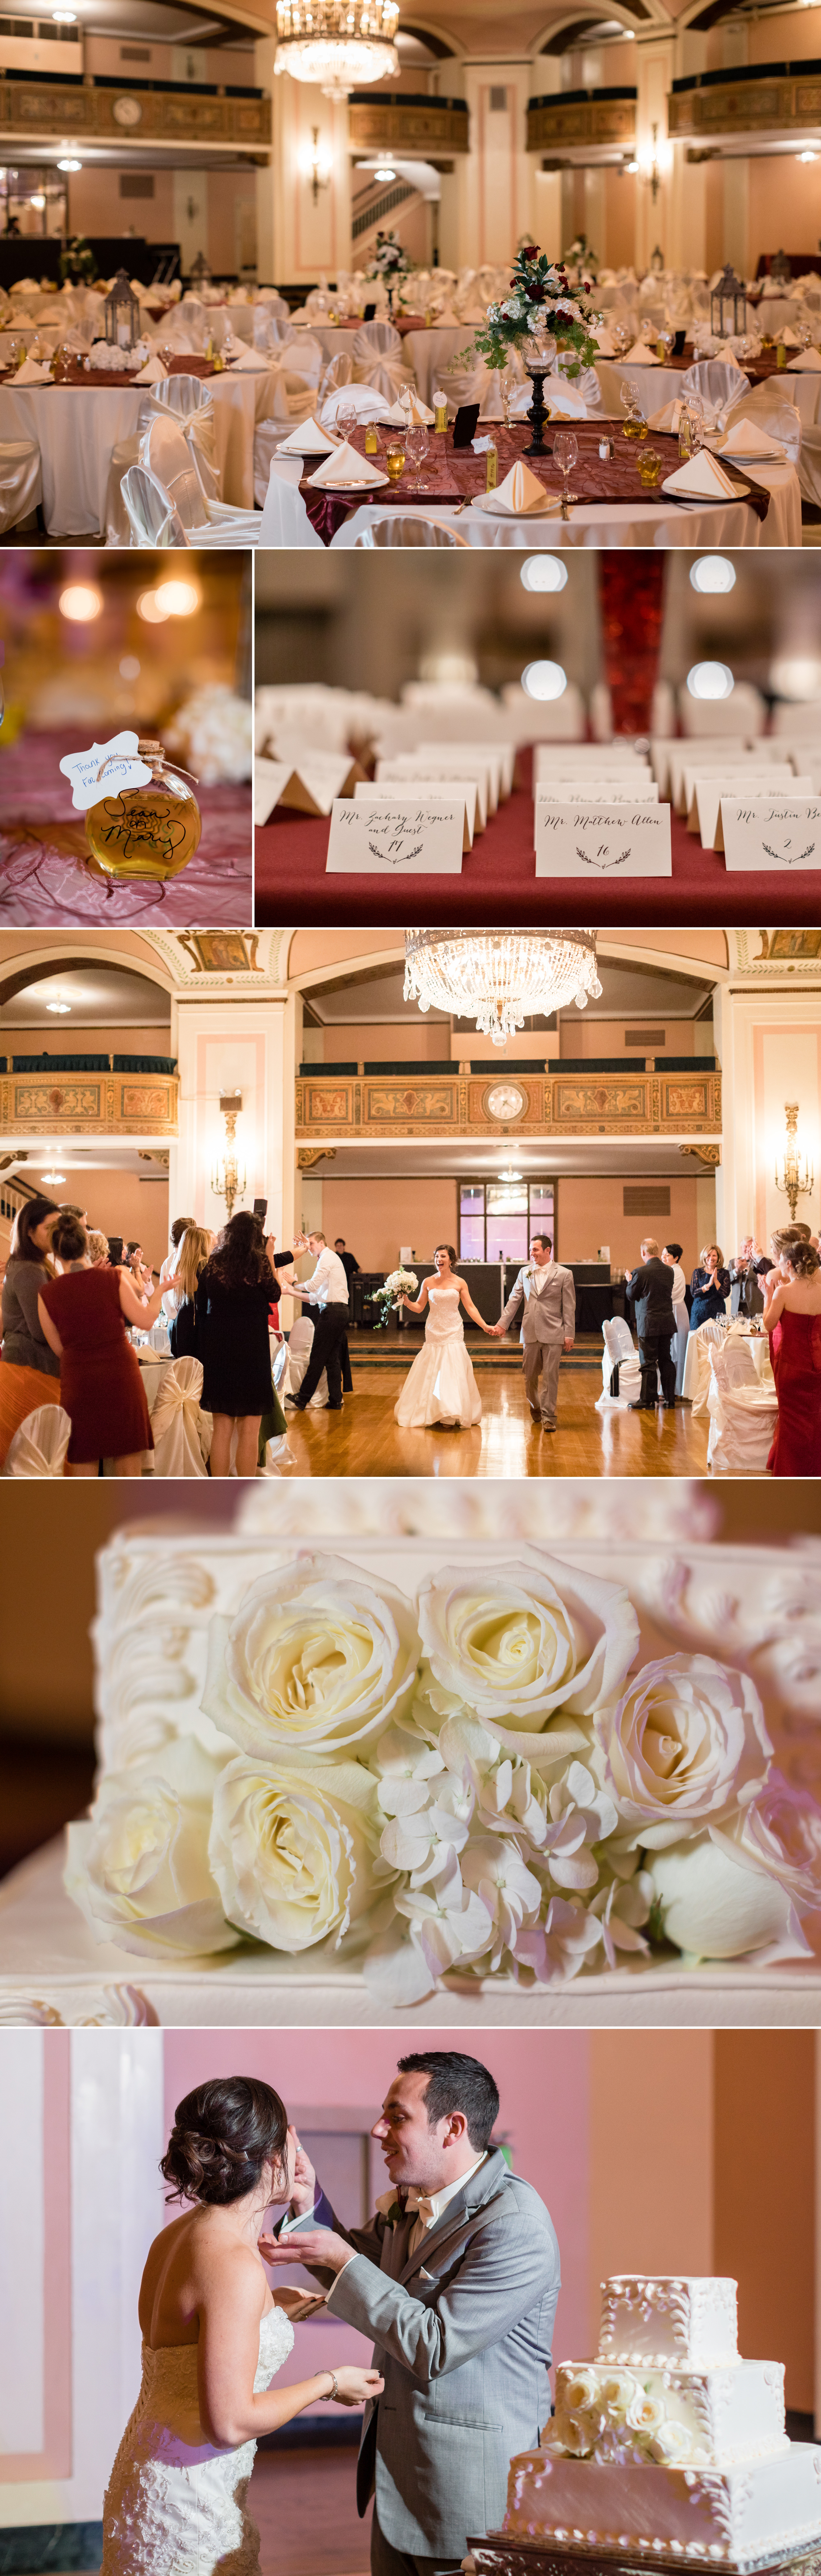 Reception of a Masonic Temple Wedding in Detroit